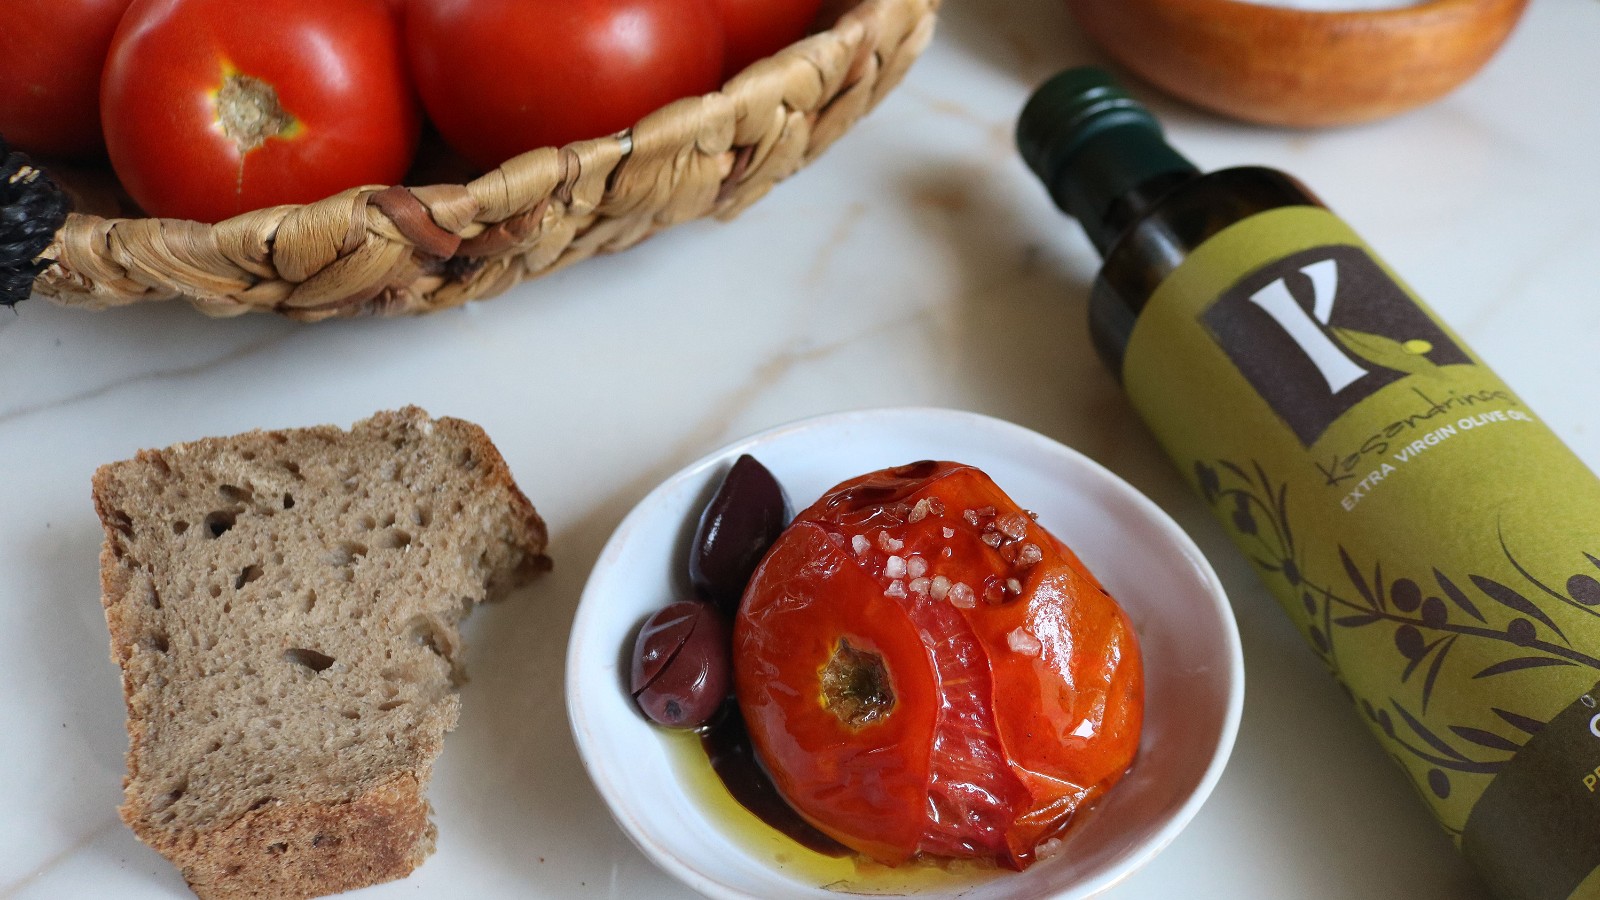 Image of Recipe-344-Whole Roasted Summer Tomatoes with Olive Oil, Balsamic Vinegar and Coarse Sea Salt